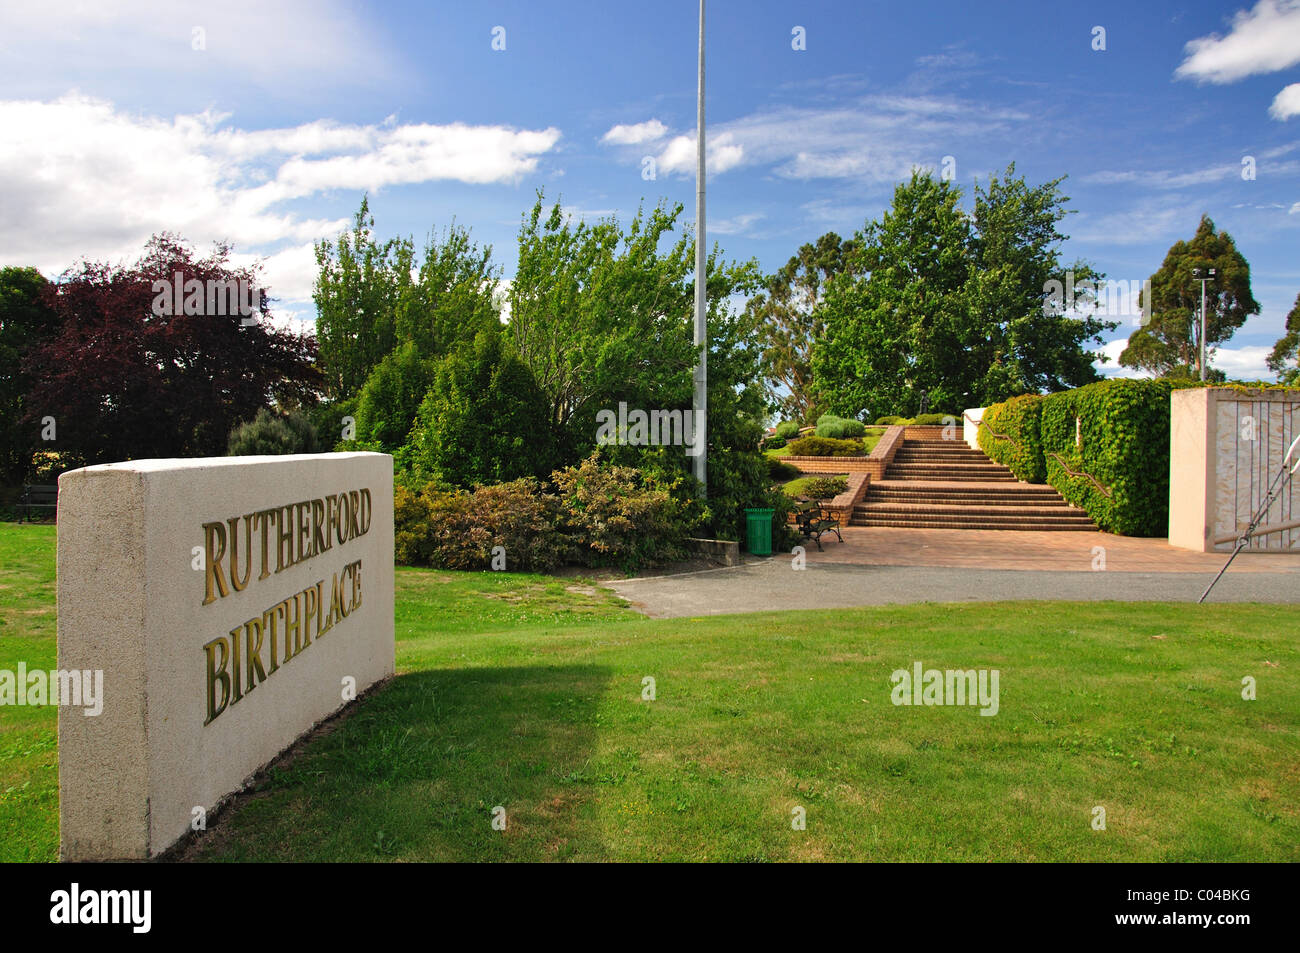 Ernest Rutherford (New Zealand physicist) Birthplace Memorial, Brightwater, near Nelson, Tasman Region, South Island, New Zealand Stock Photo